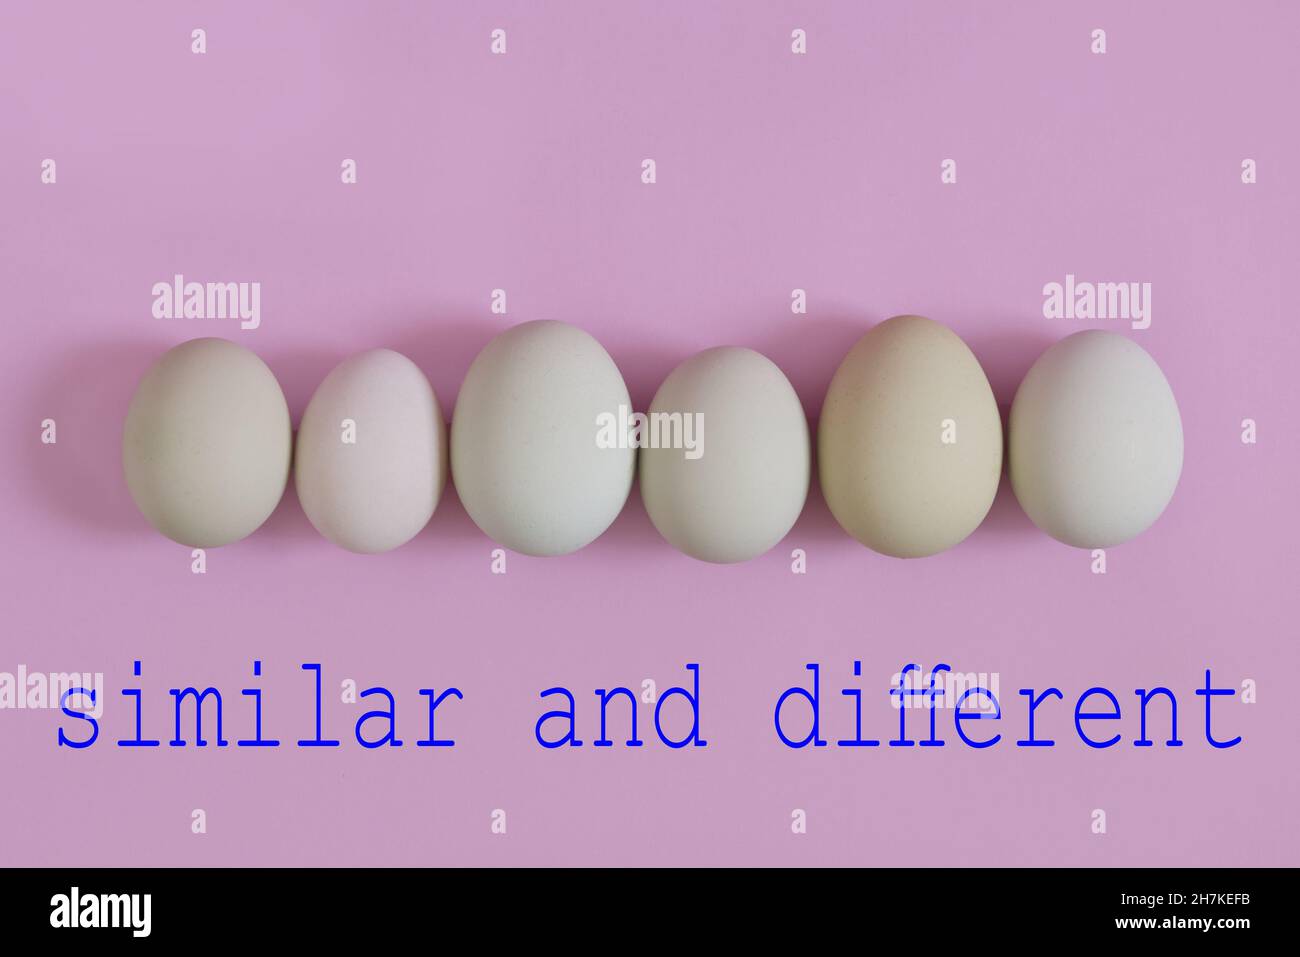 Conceptual photo with text. Eggs similars but differents Stock Photo